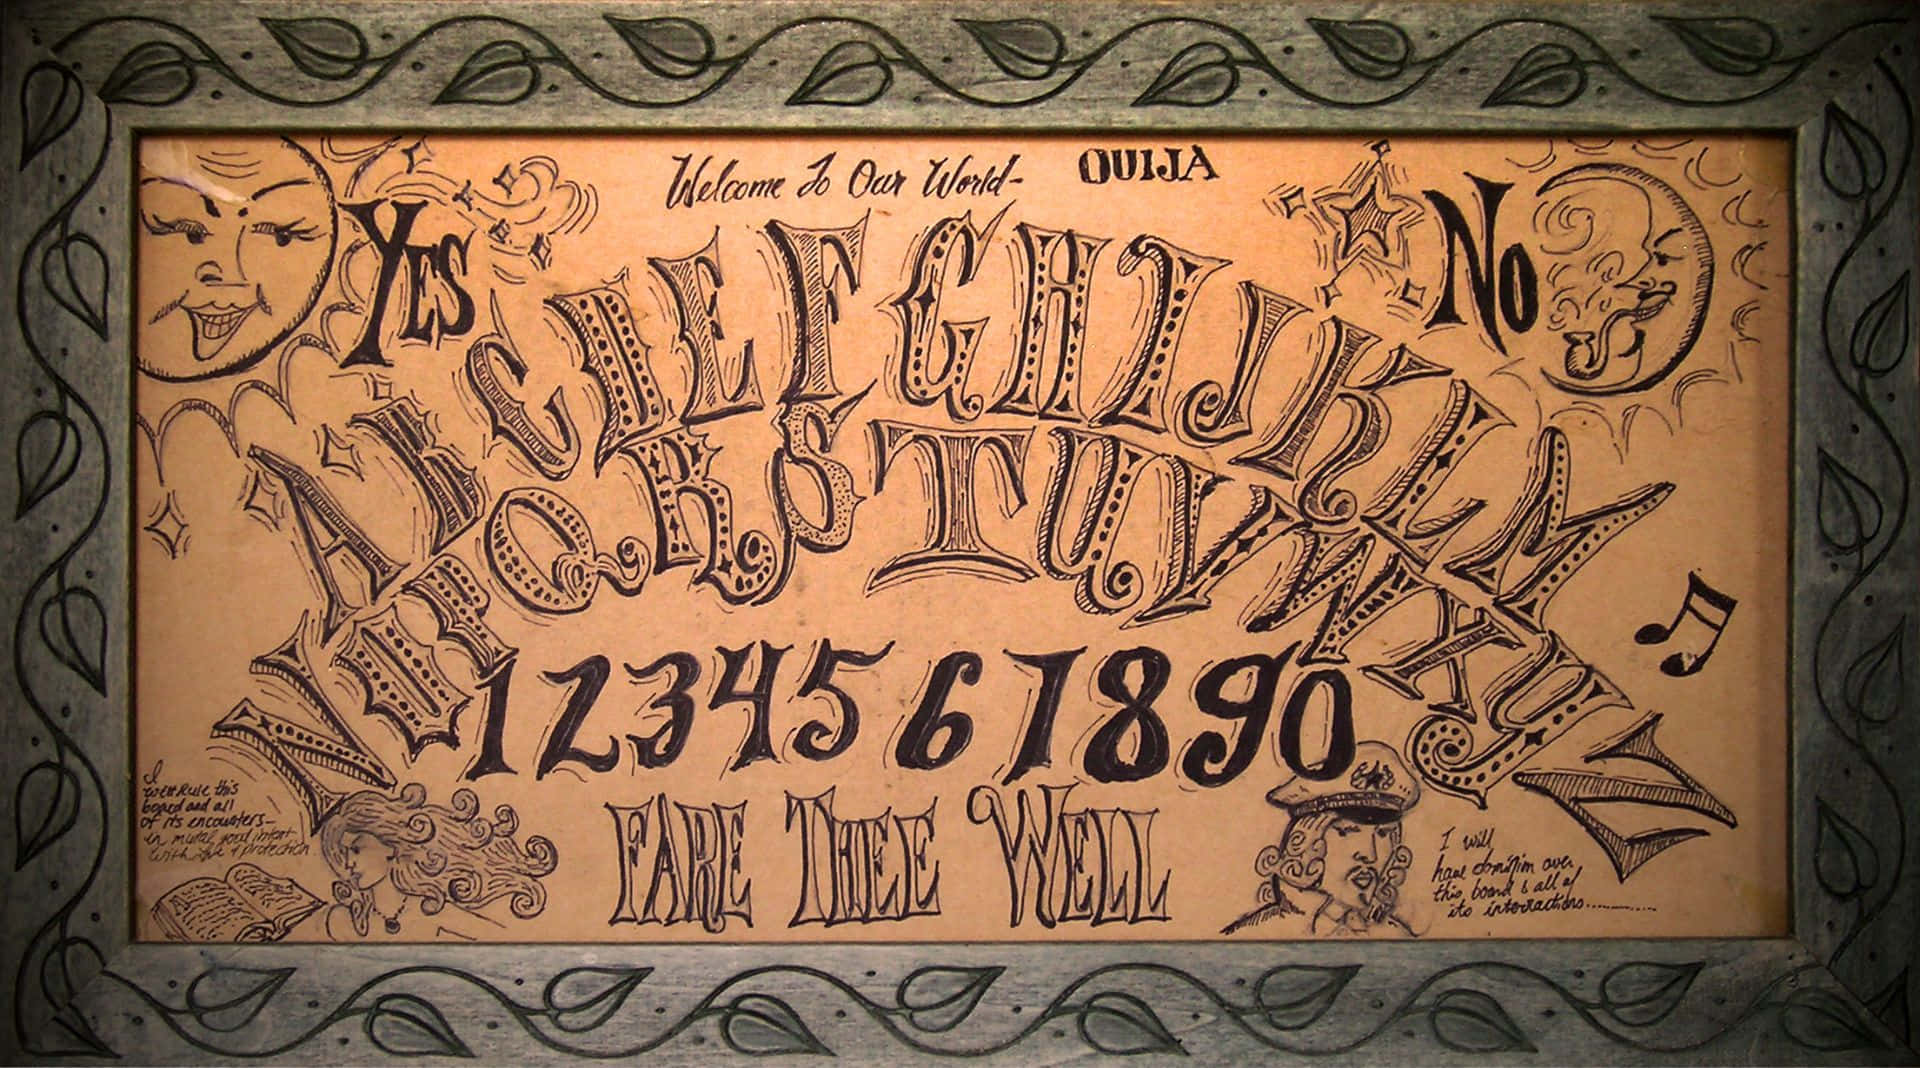 "Step boldly into the unknown with an Ouija board!" Wallpaper